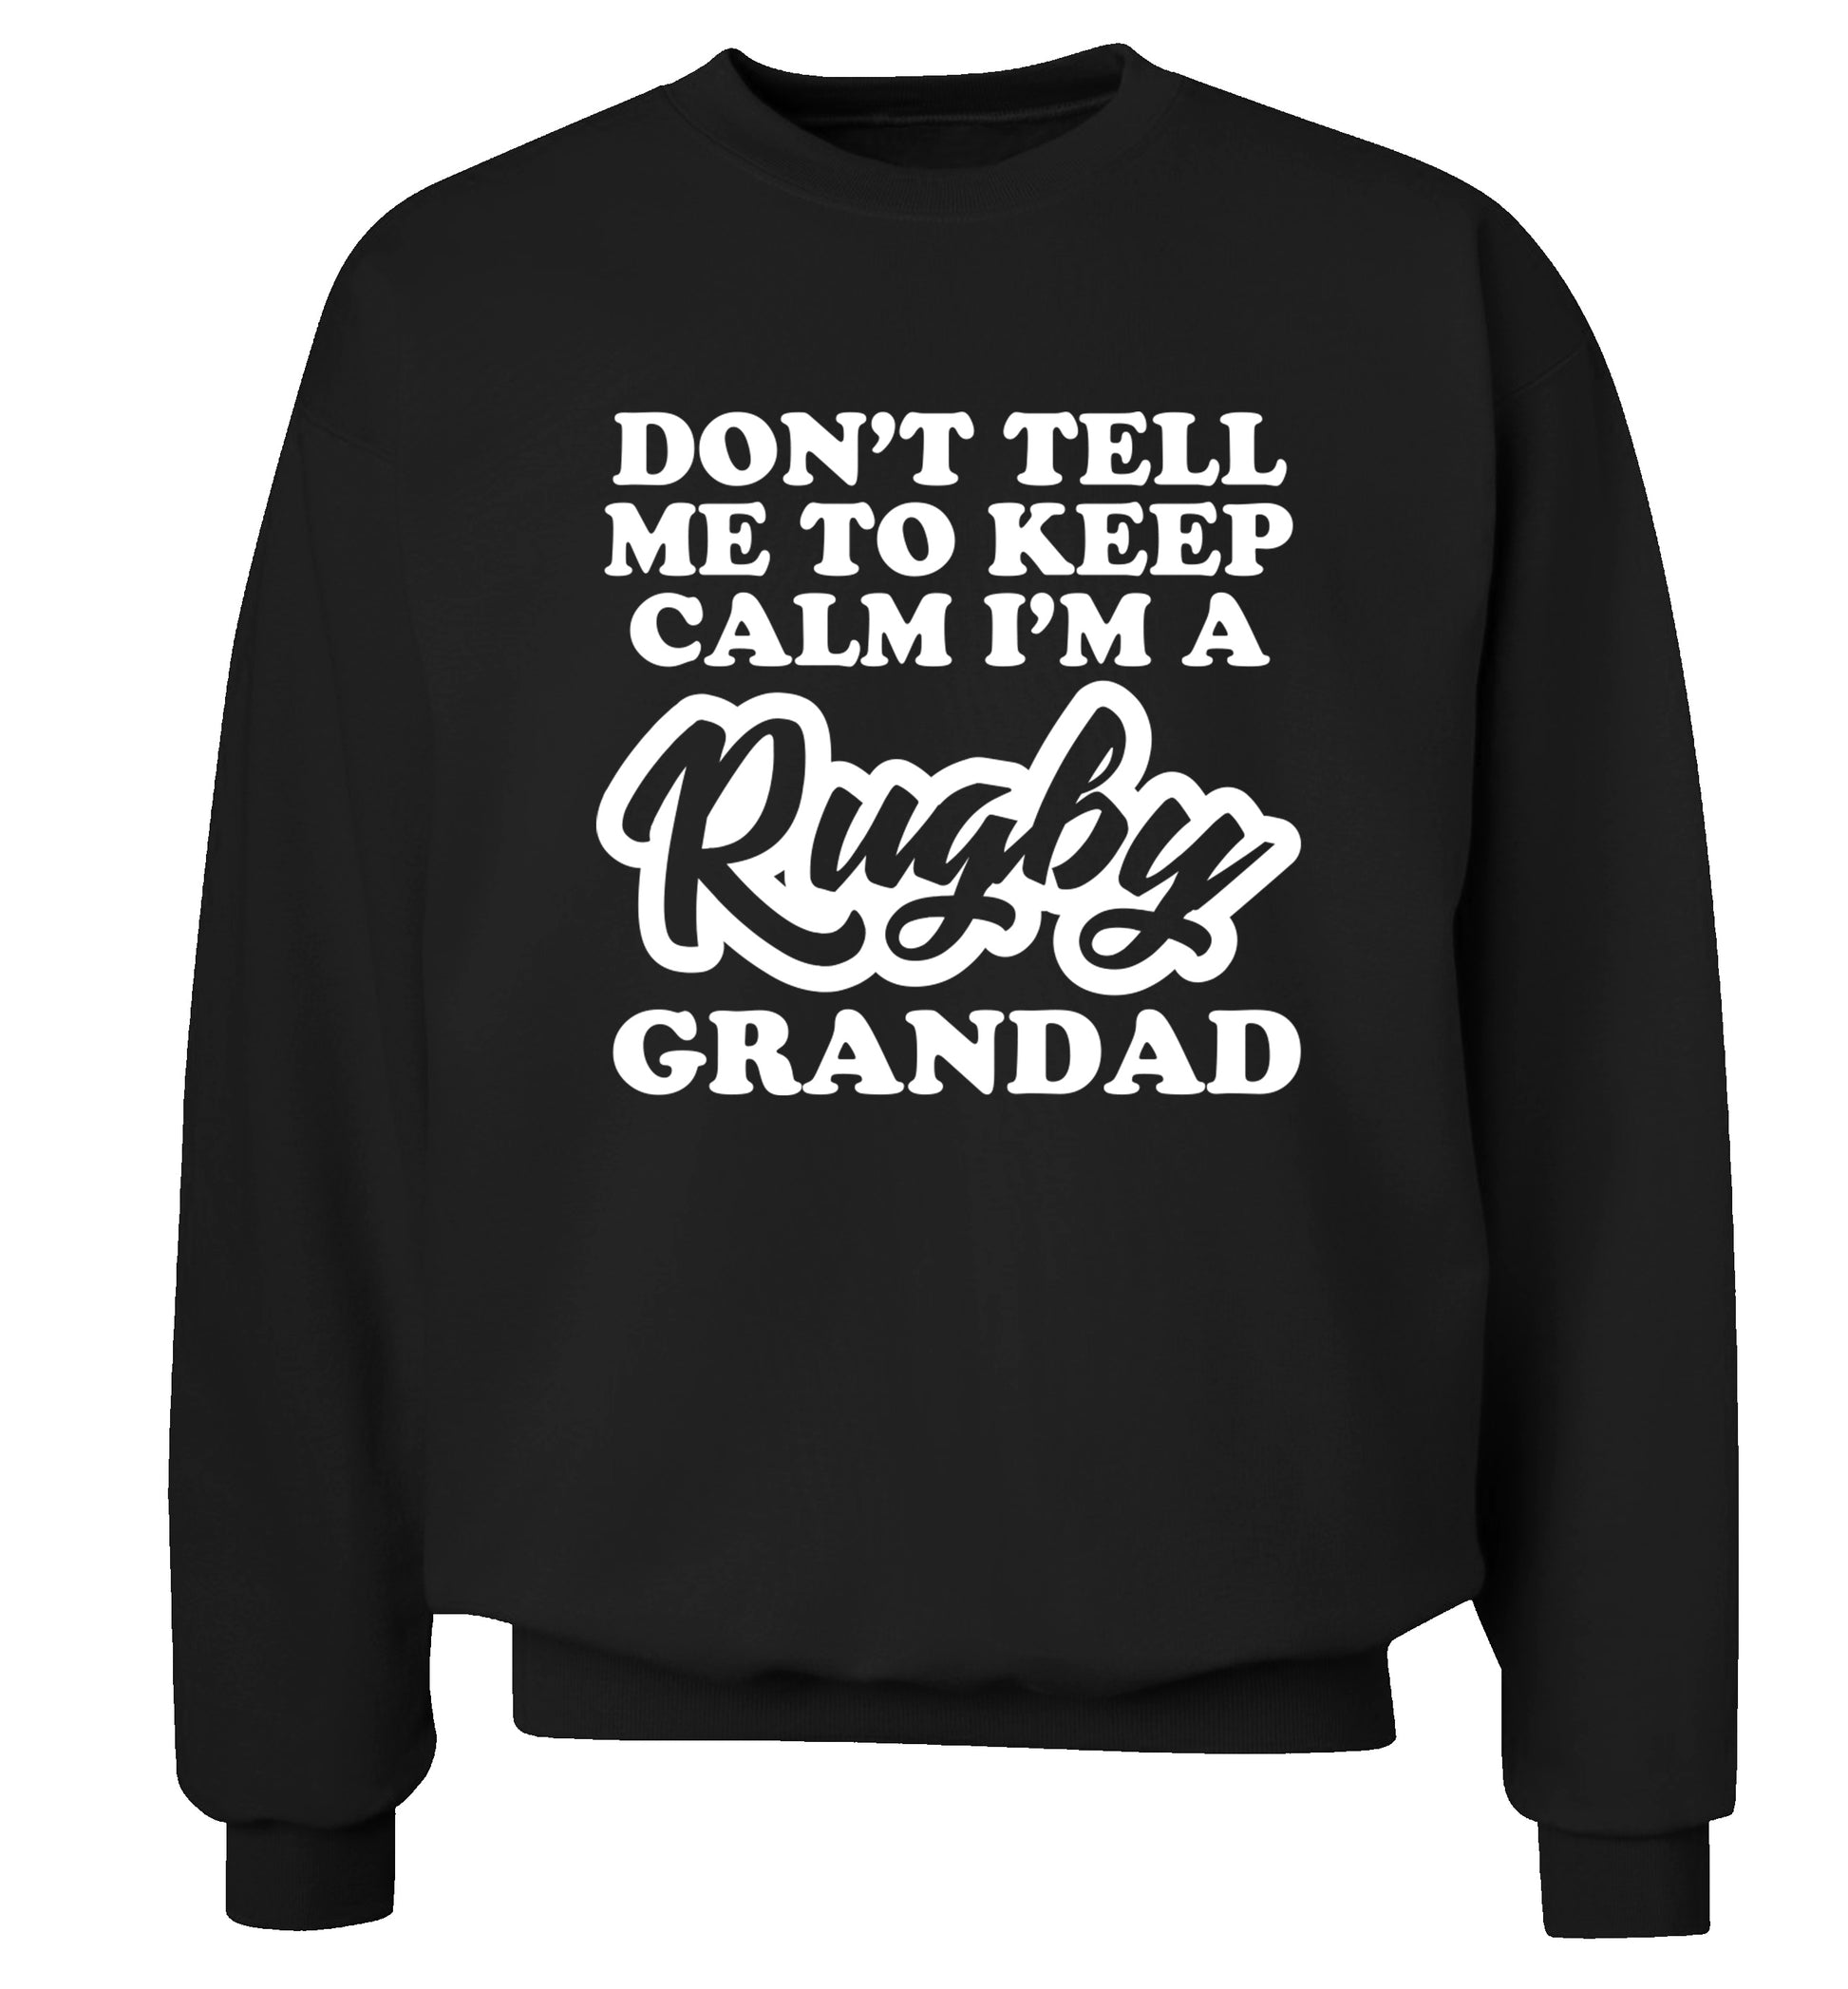 Don't tell me to keep calm I'm a rugby dad Adult's unisex black Sweater 2XL